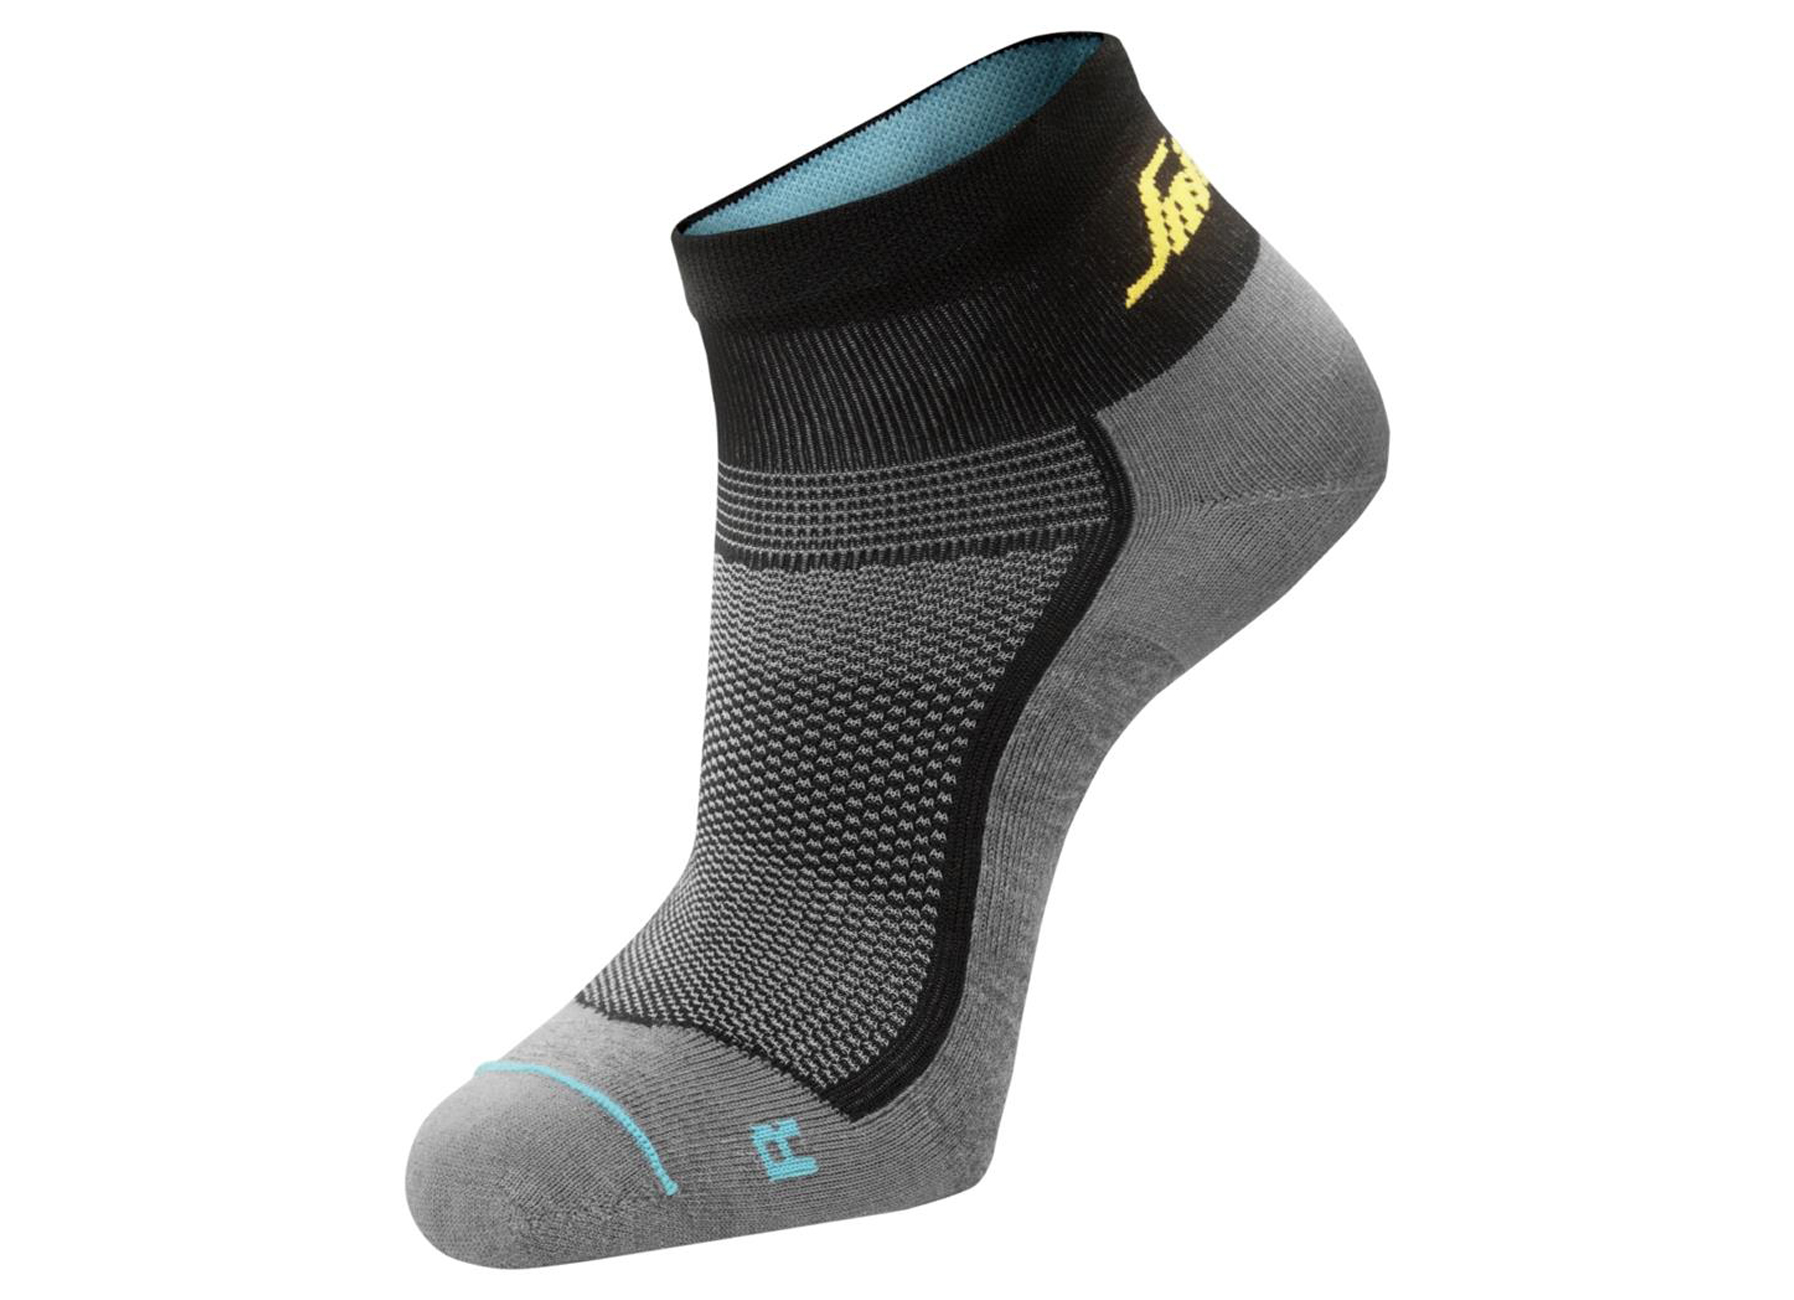 SNICKERS LITEWORK 37.5 CHAUSSETTES BASSES GRIS 9218 45-48